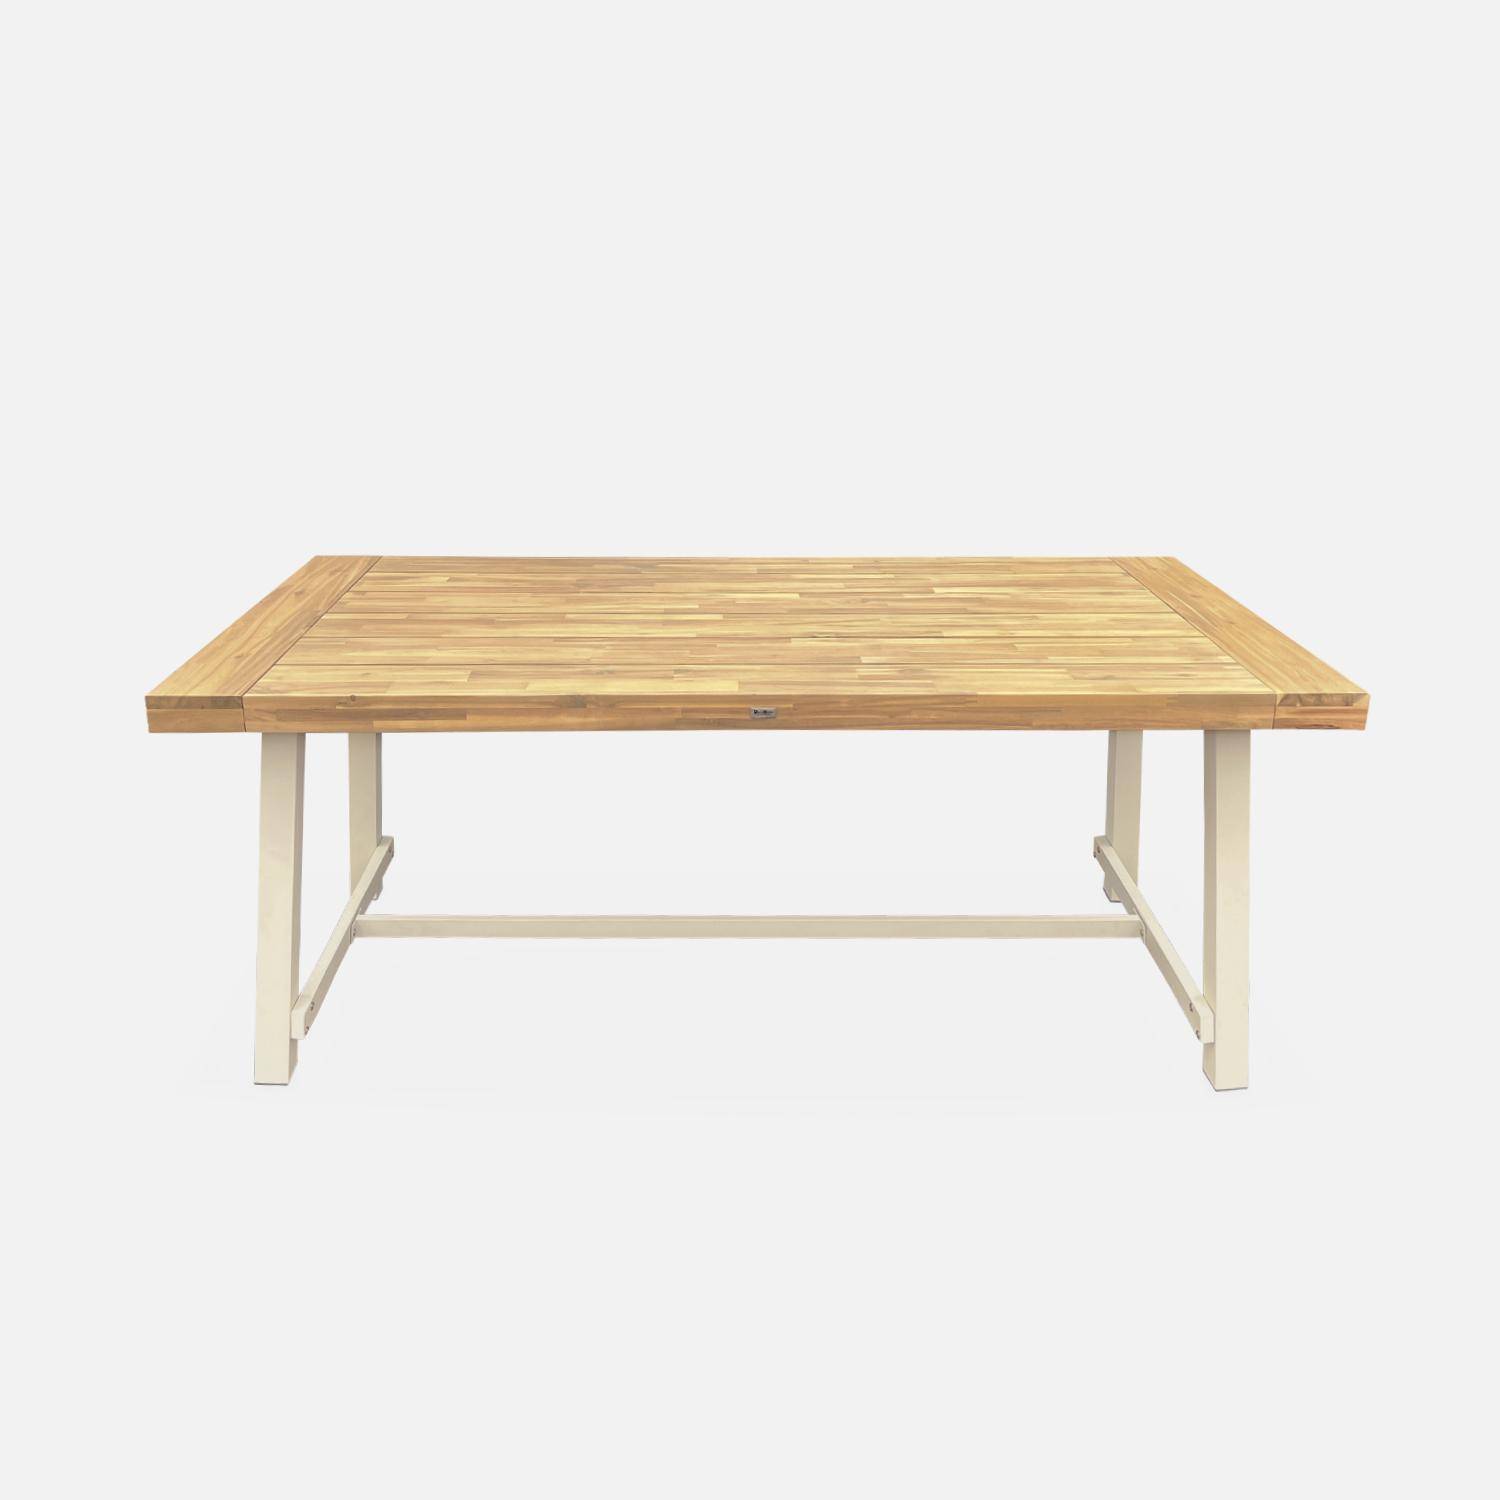 Acacia and steel 8-seater table, 190x91.5x76cm, Fortaleza, Light wood colour, Indoor/outdoor,sweeek,Photo4